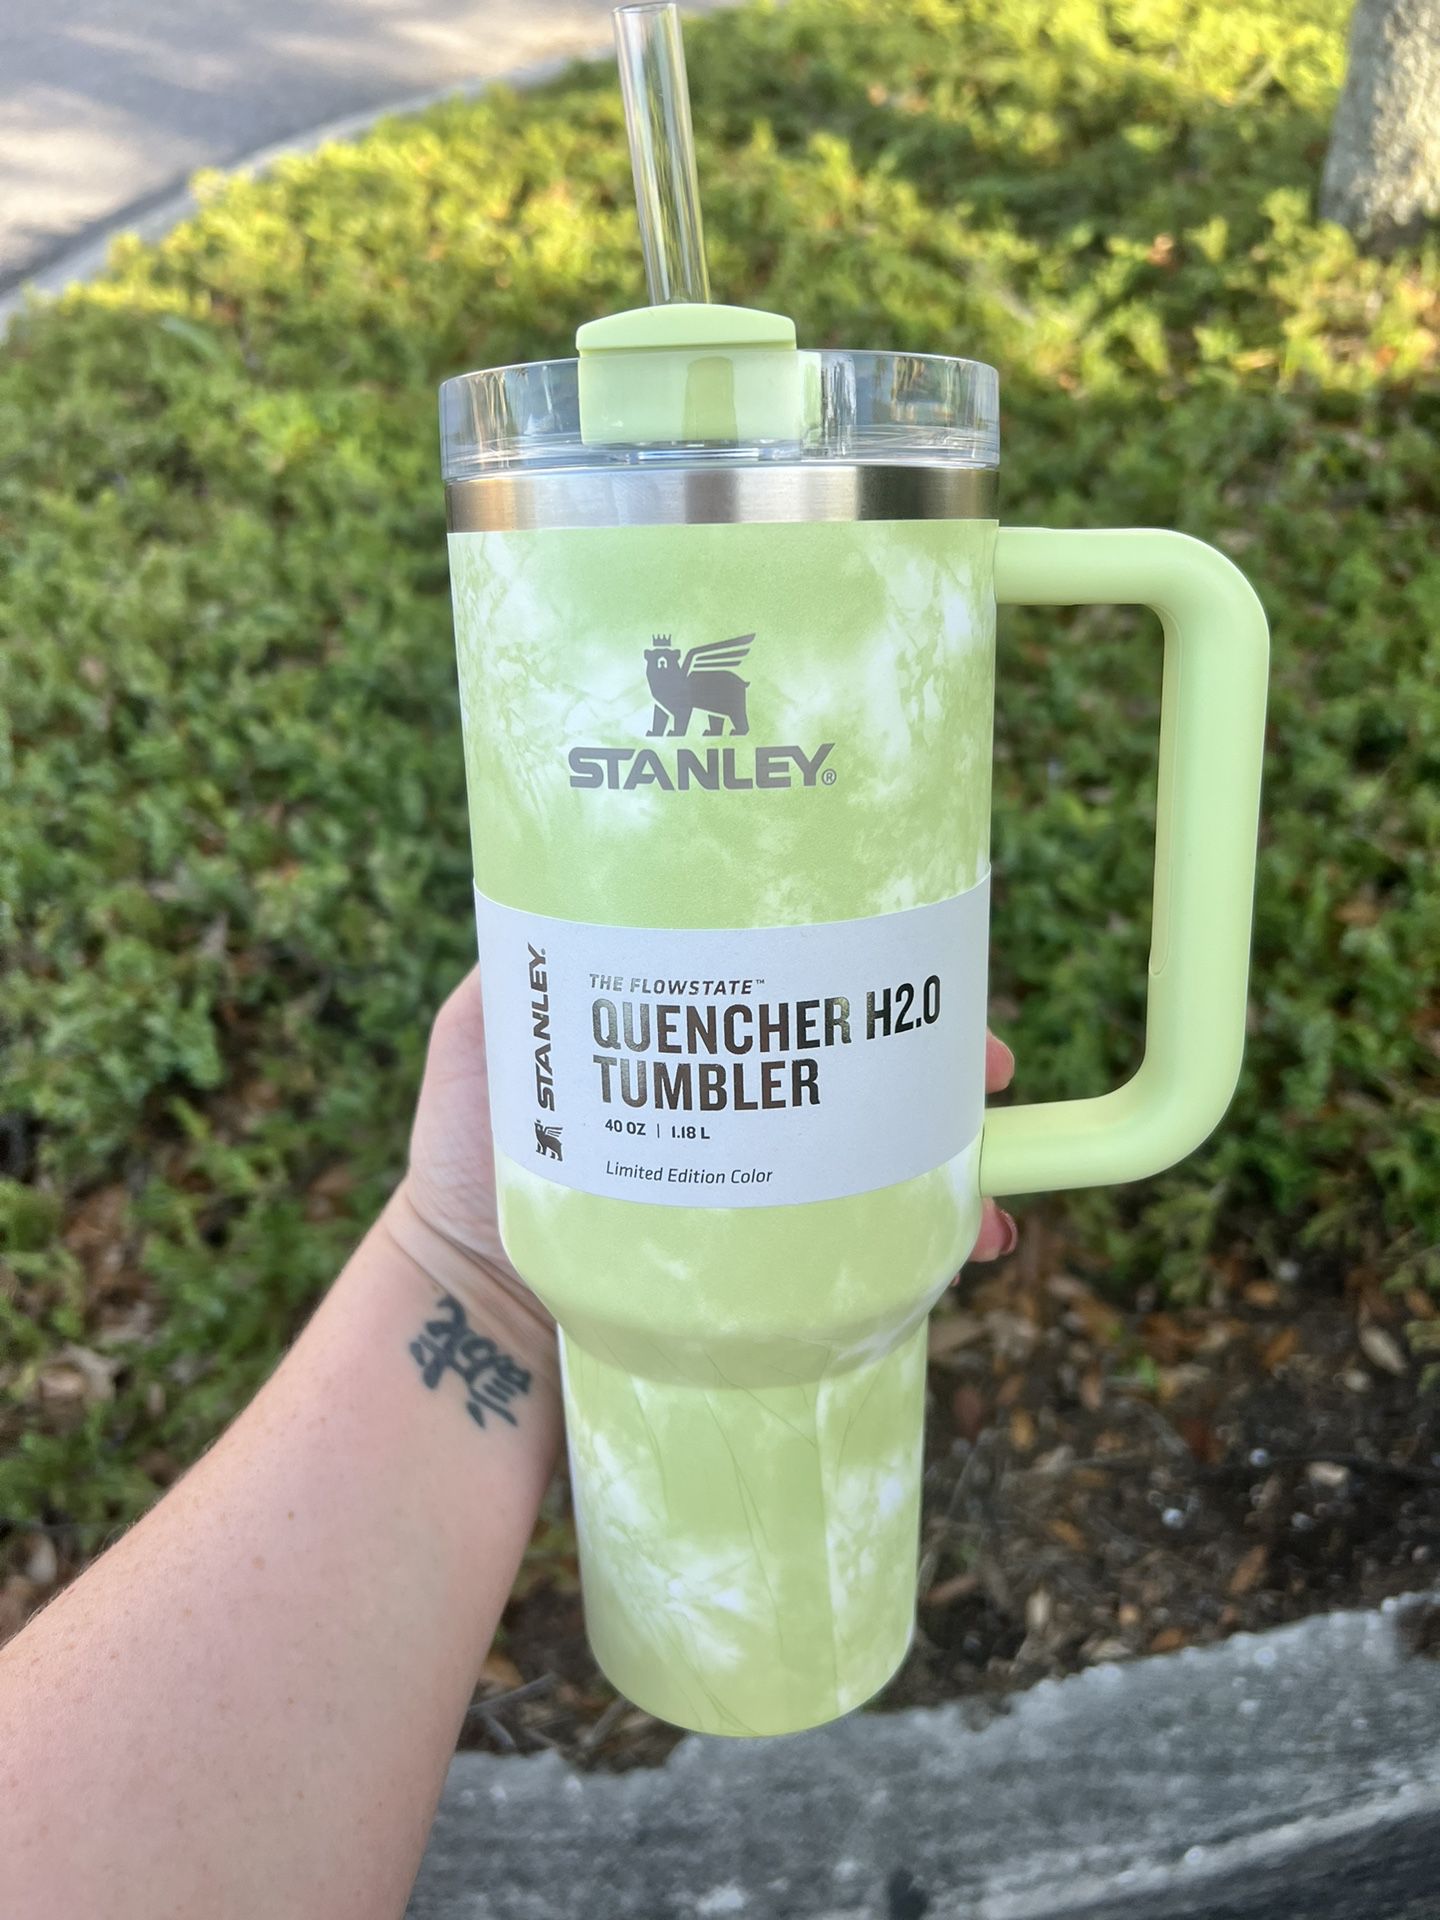 Stanley 40 oz tumbler Peach tie dye (quencher H2.0 Limited Edition Color)  for Sale in San Fernando, CA - OfferUp